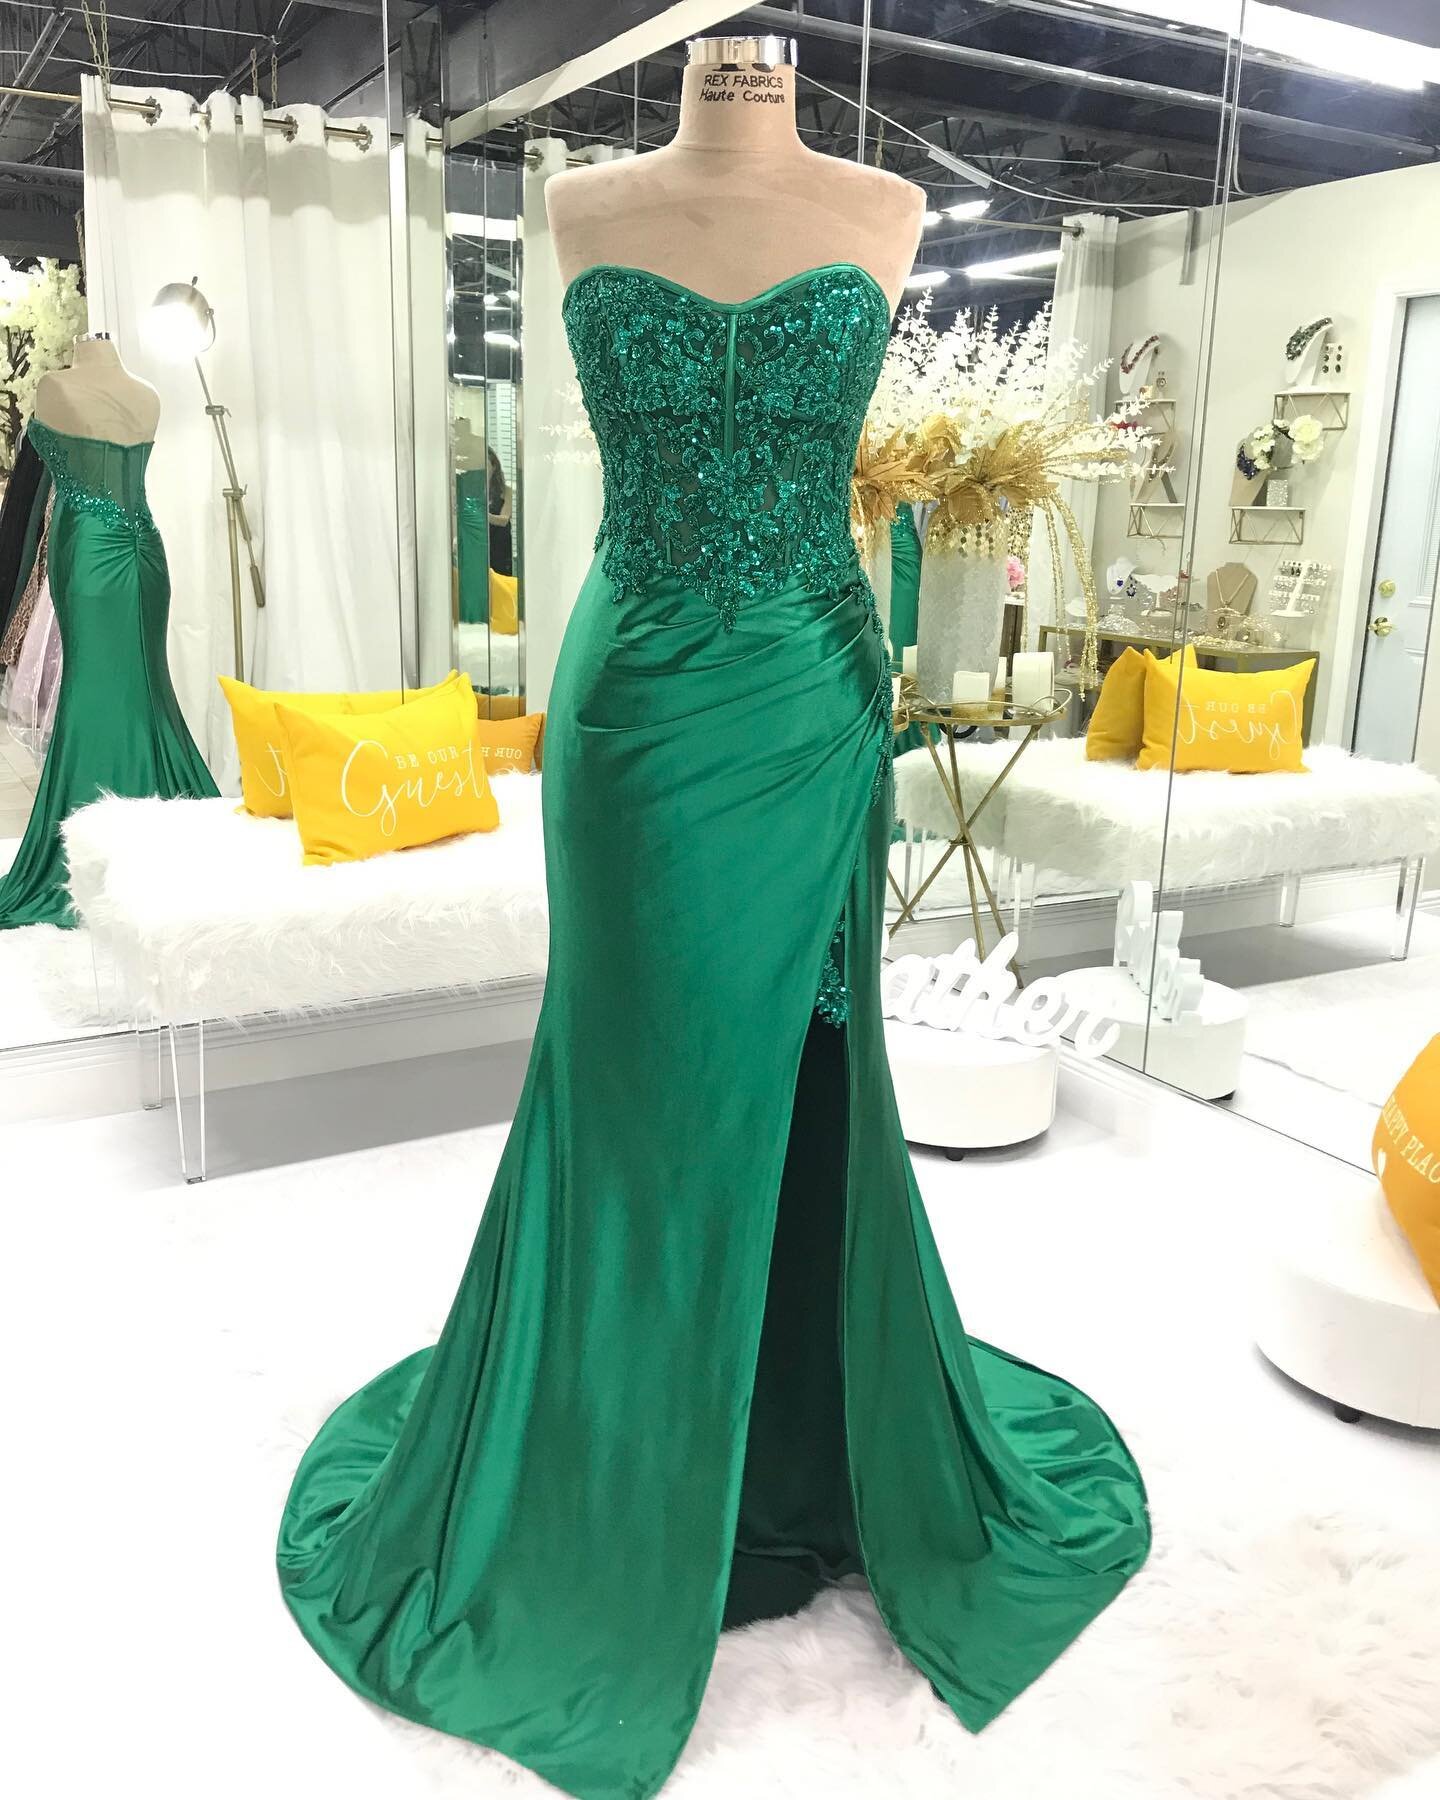 emerald green beauty 😍 the lace top is everything !!
&bull;
&bull;
&bull;
&bull;

#quince#quinceañeramiami #quinceañera #quincedress #miami#miamidresses #miamidressrental#southflorida #dresses #gowns #dressrental #quinceañeras #quinceaños #quinc